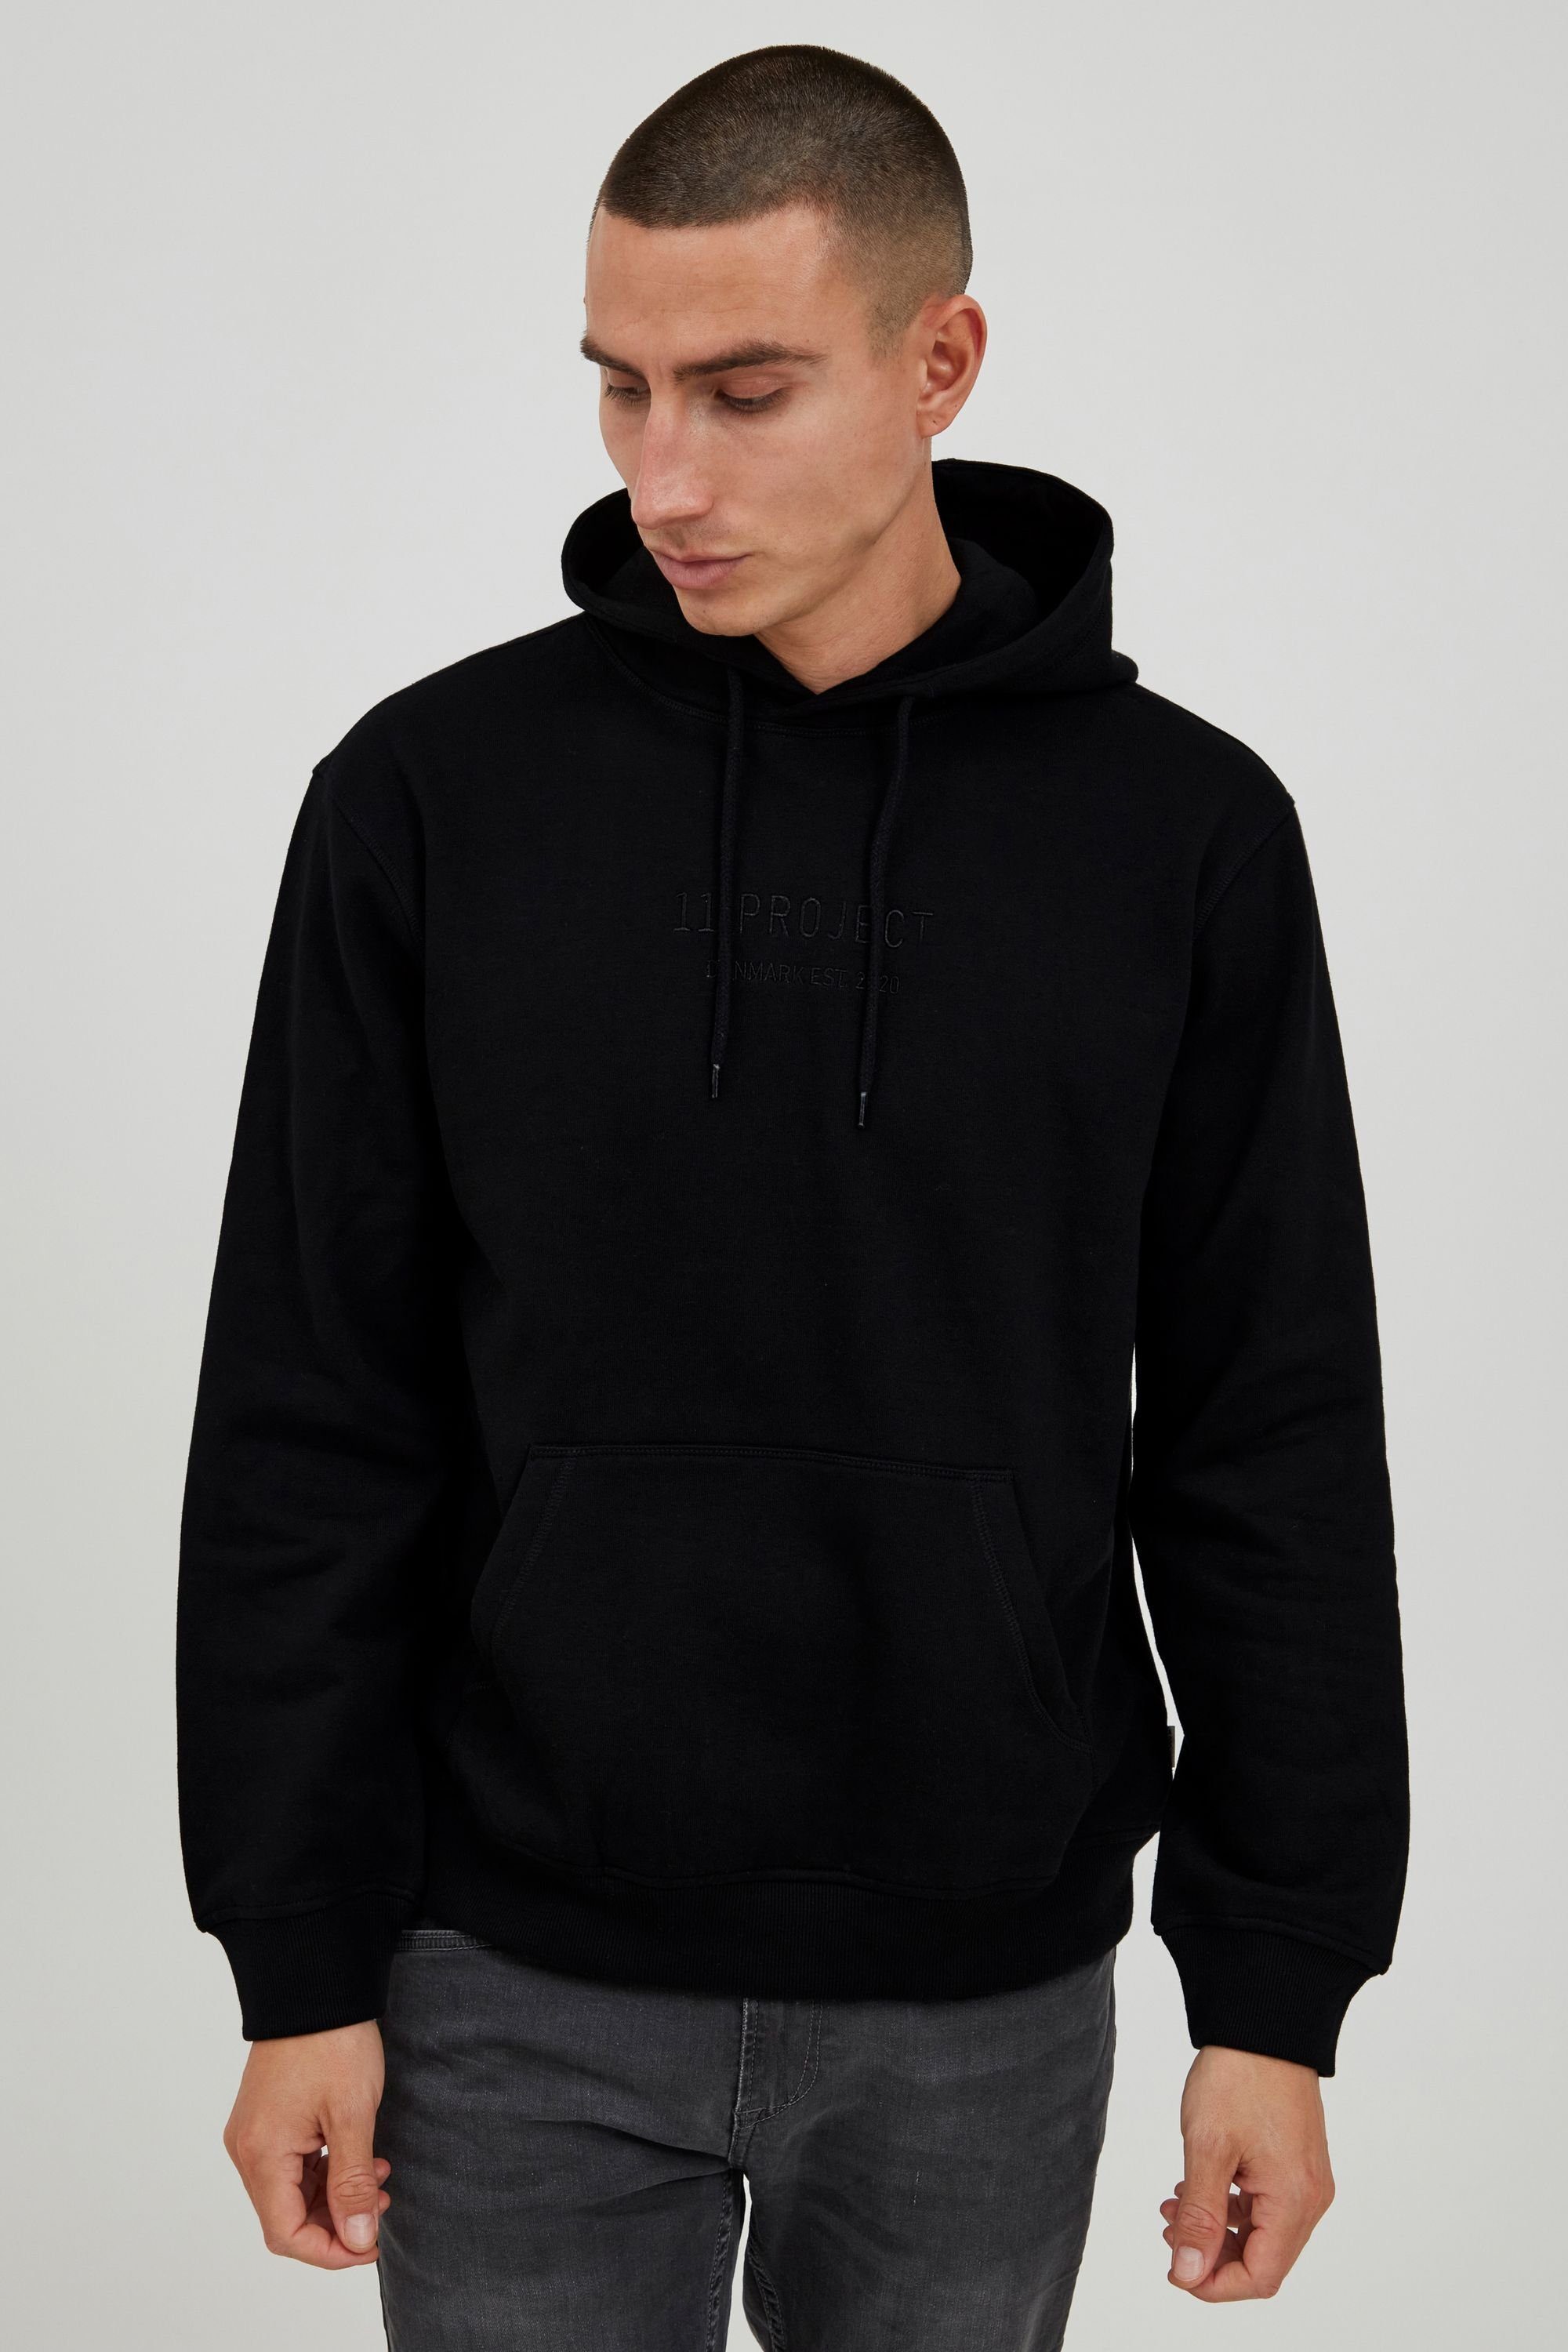 Project PRDafo Hoodie Black 11 11 Project